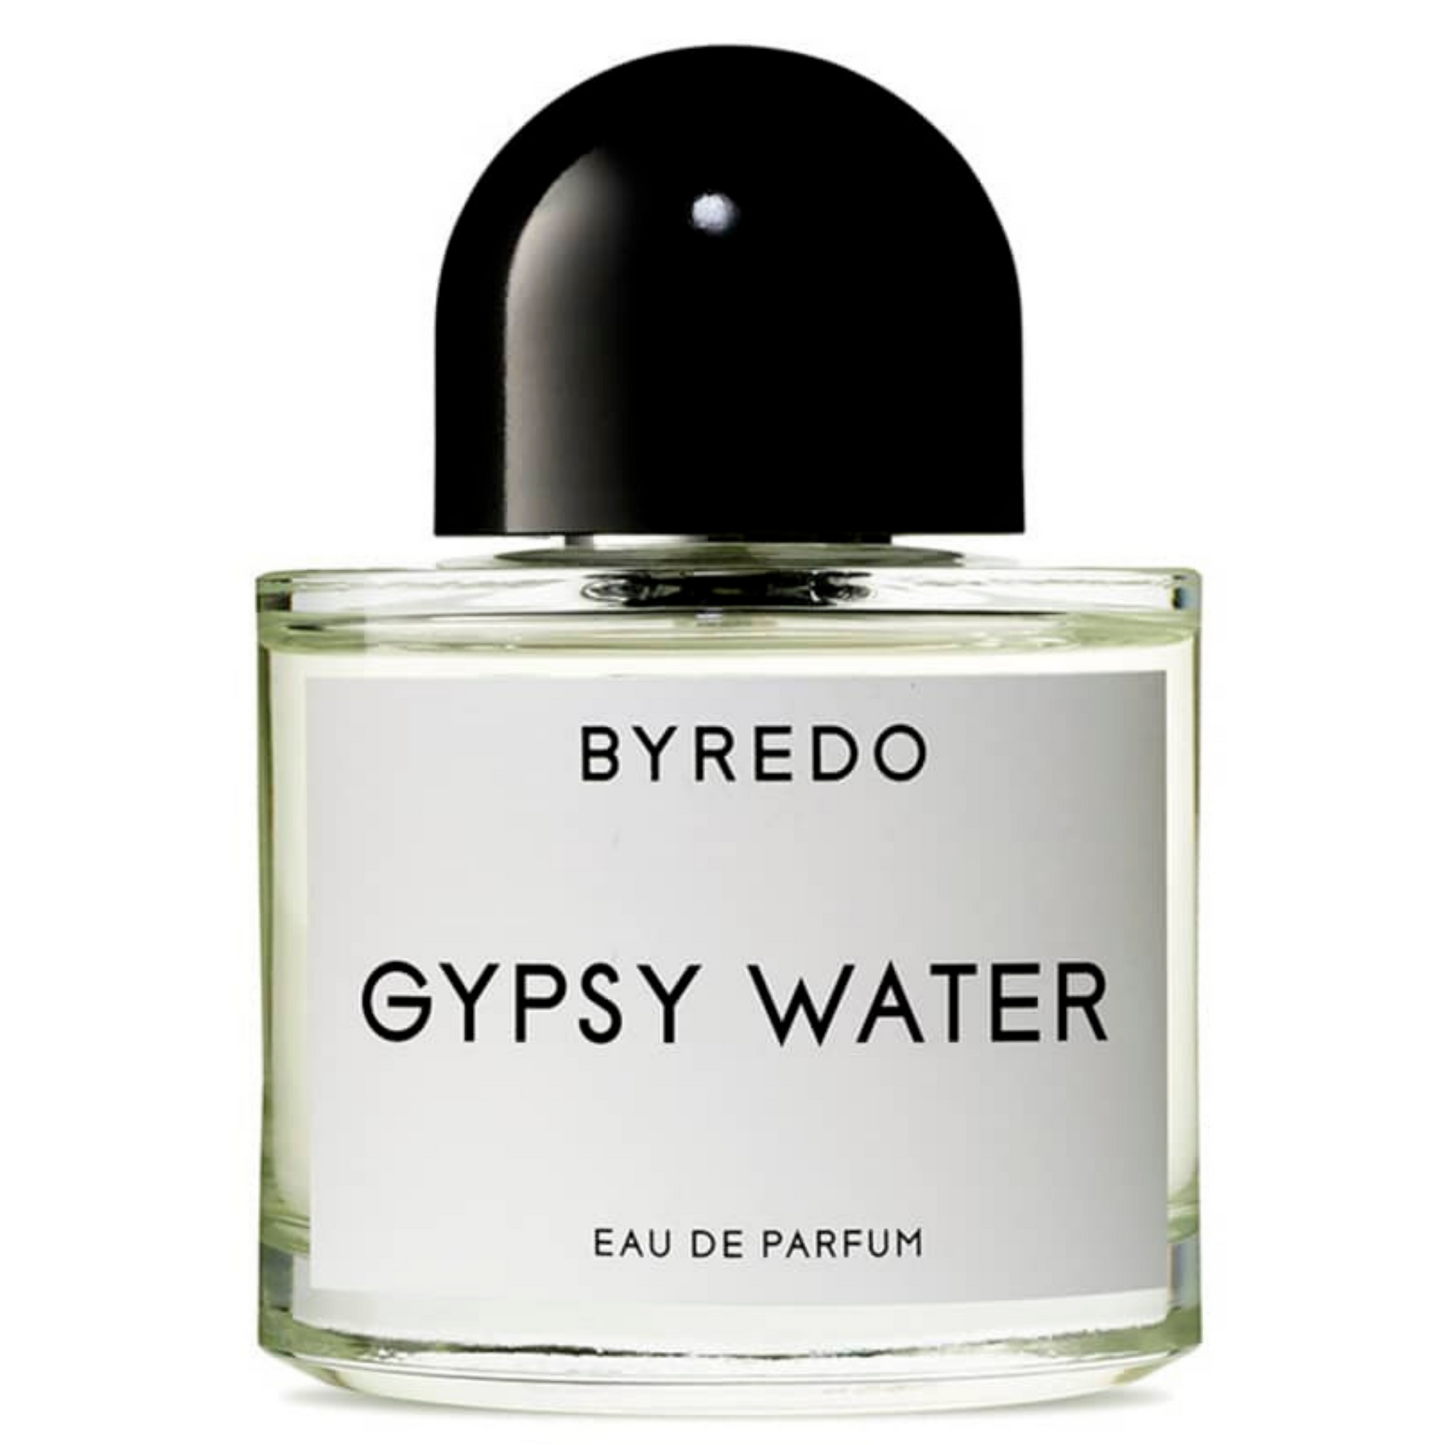 Primary Image of Gypsy Water EDP 50ml